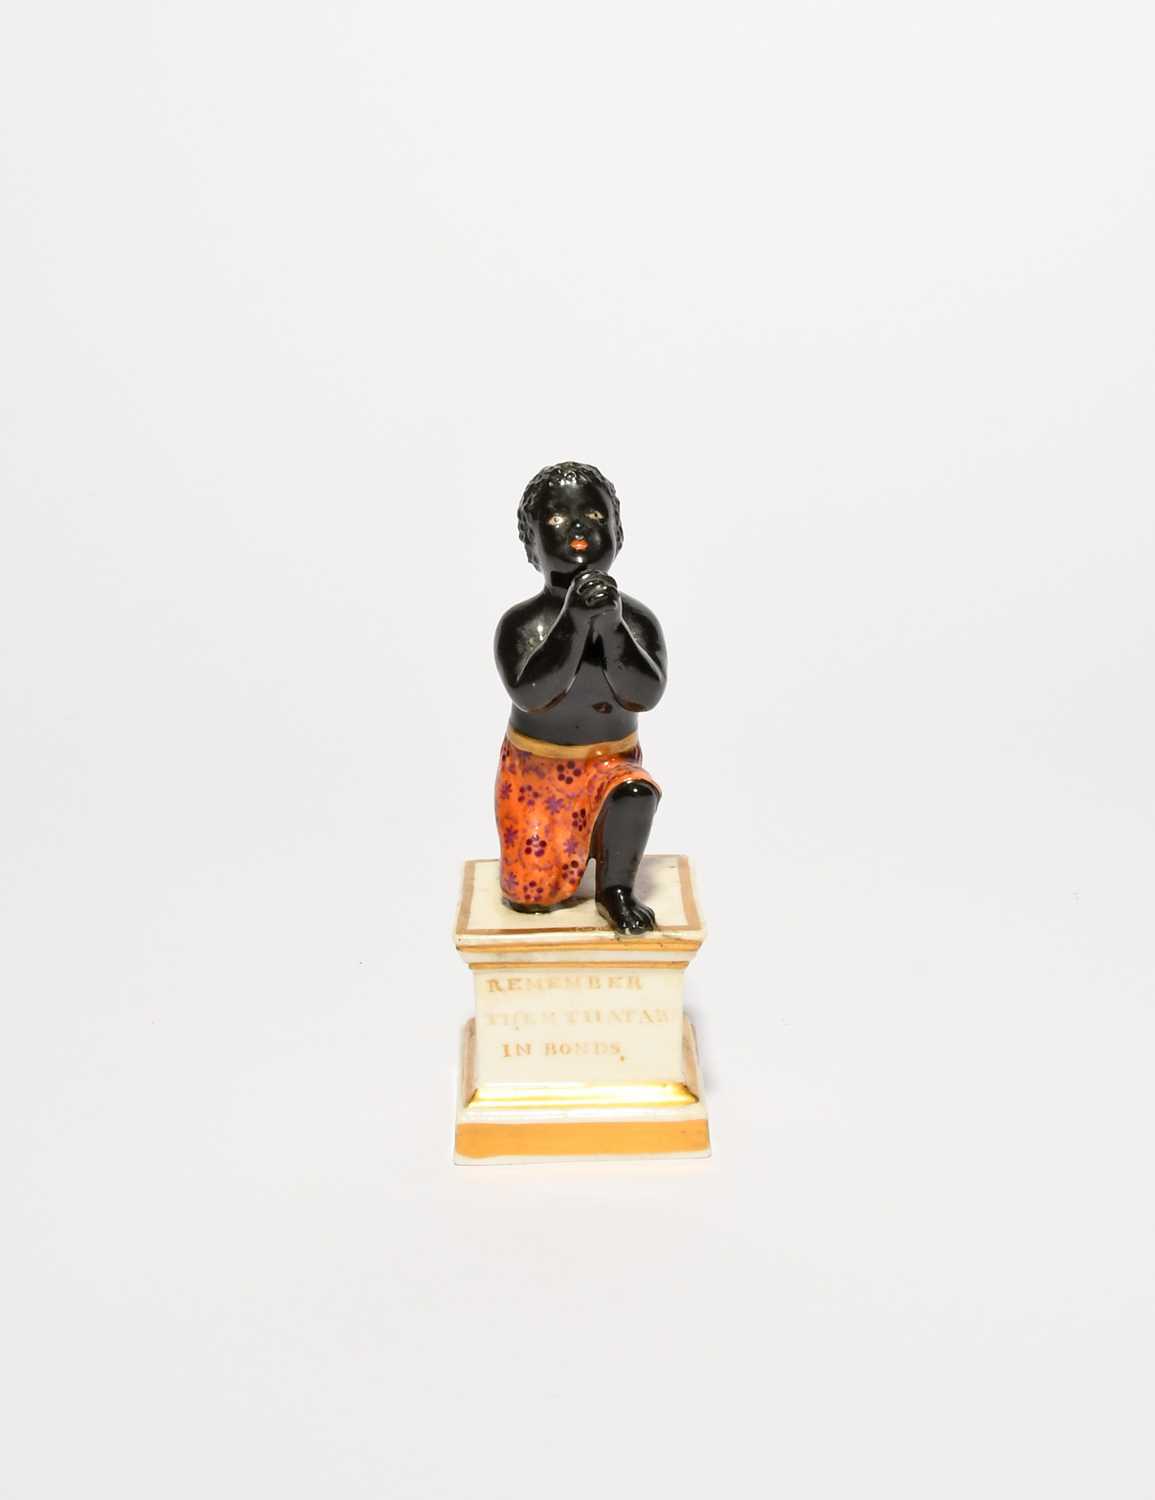 A rare Derby anti-slavery figure, early 19th century, modelled as a young black slave on one knee